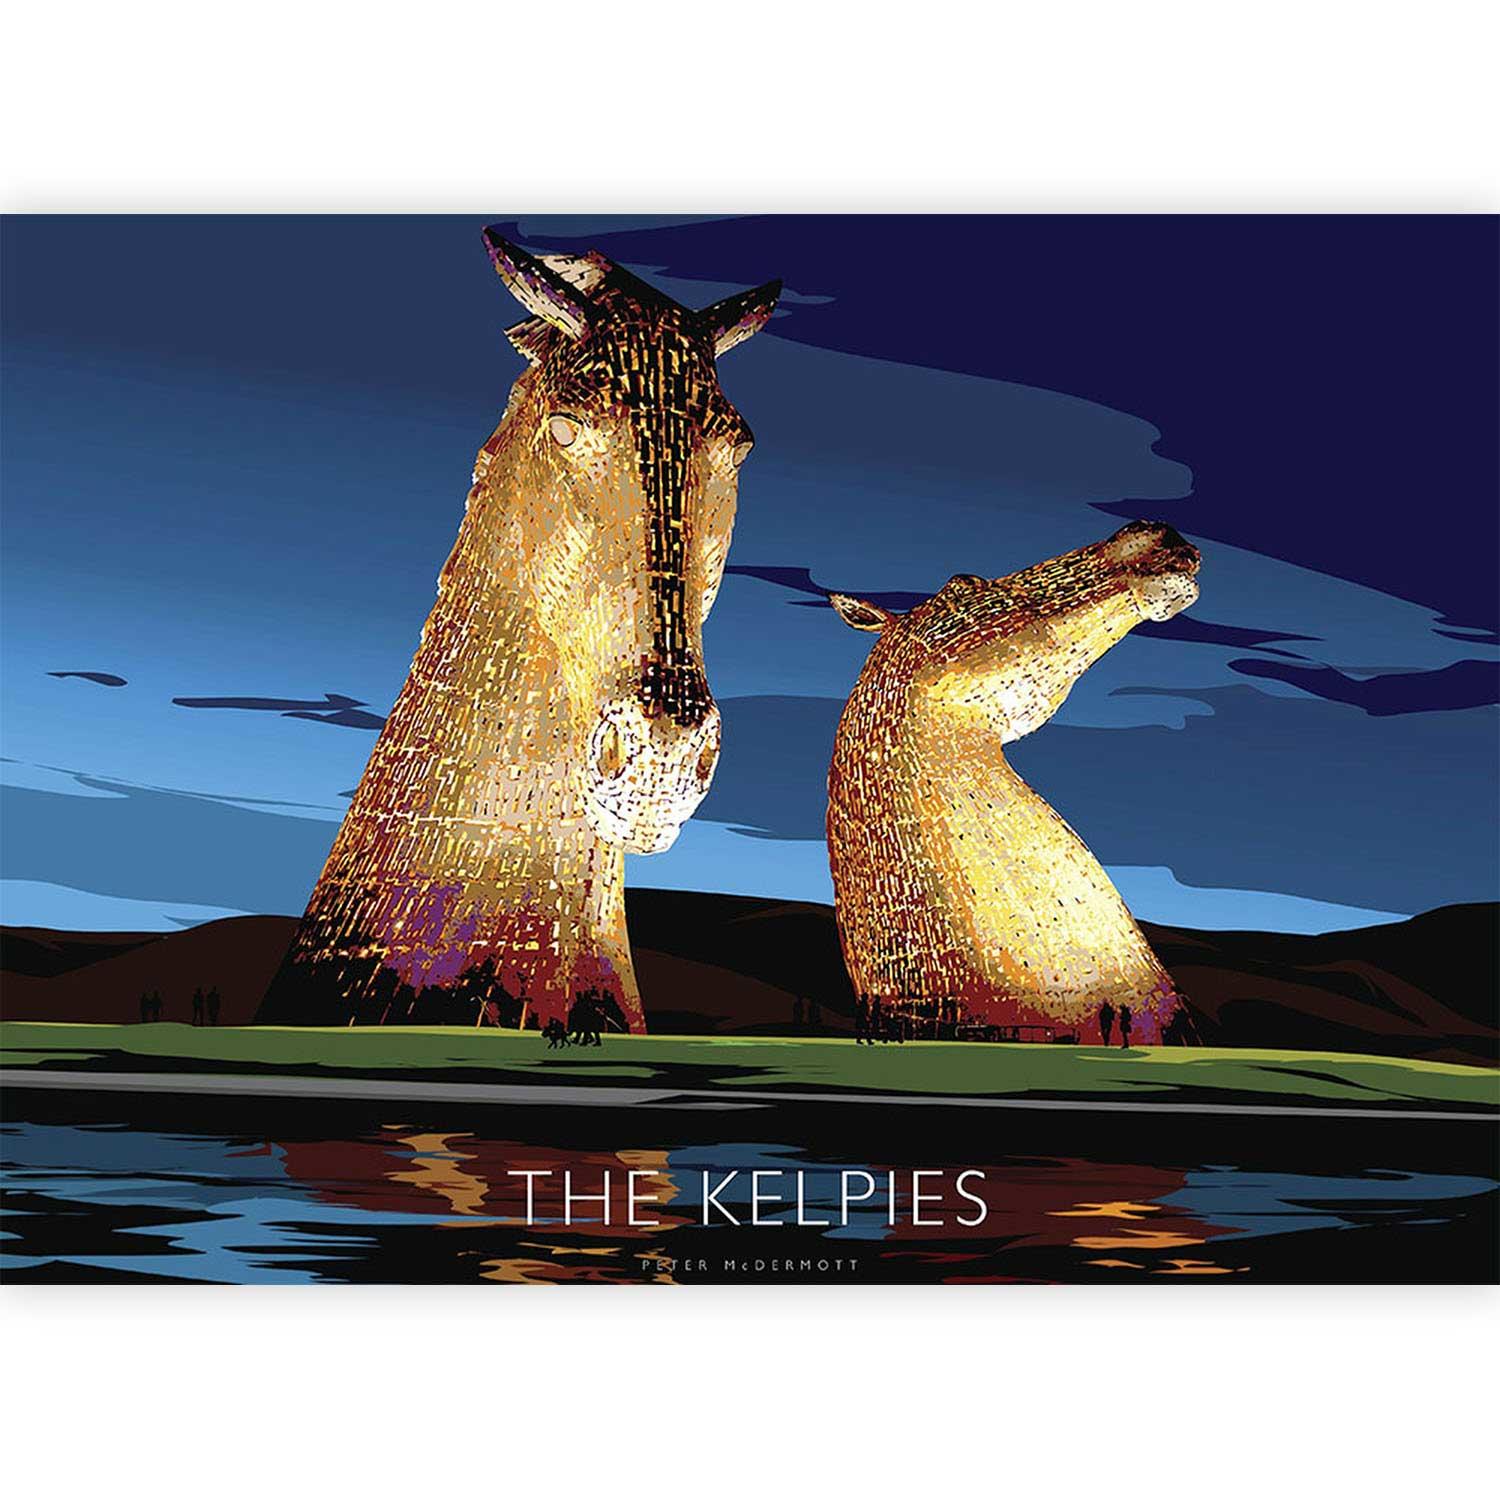 The Kelpies at Night by Peter McDermott